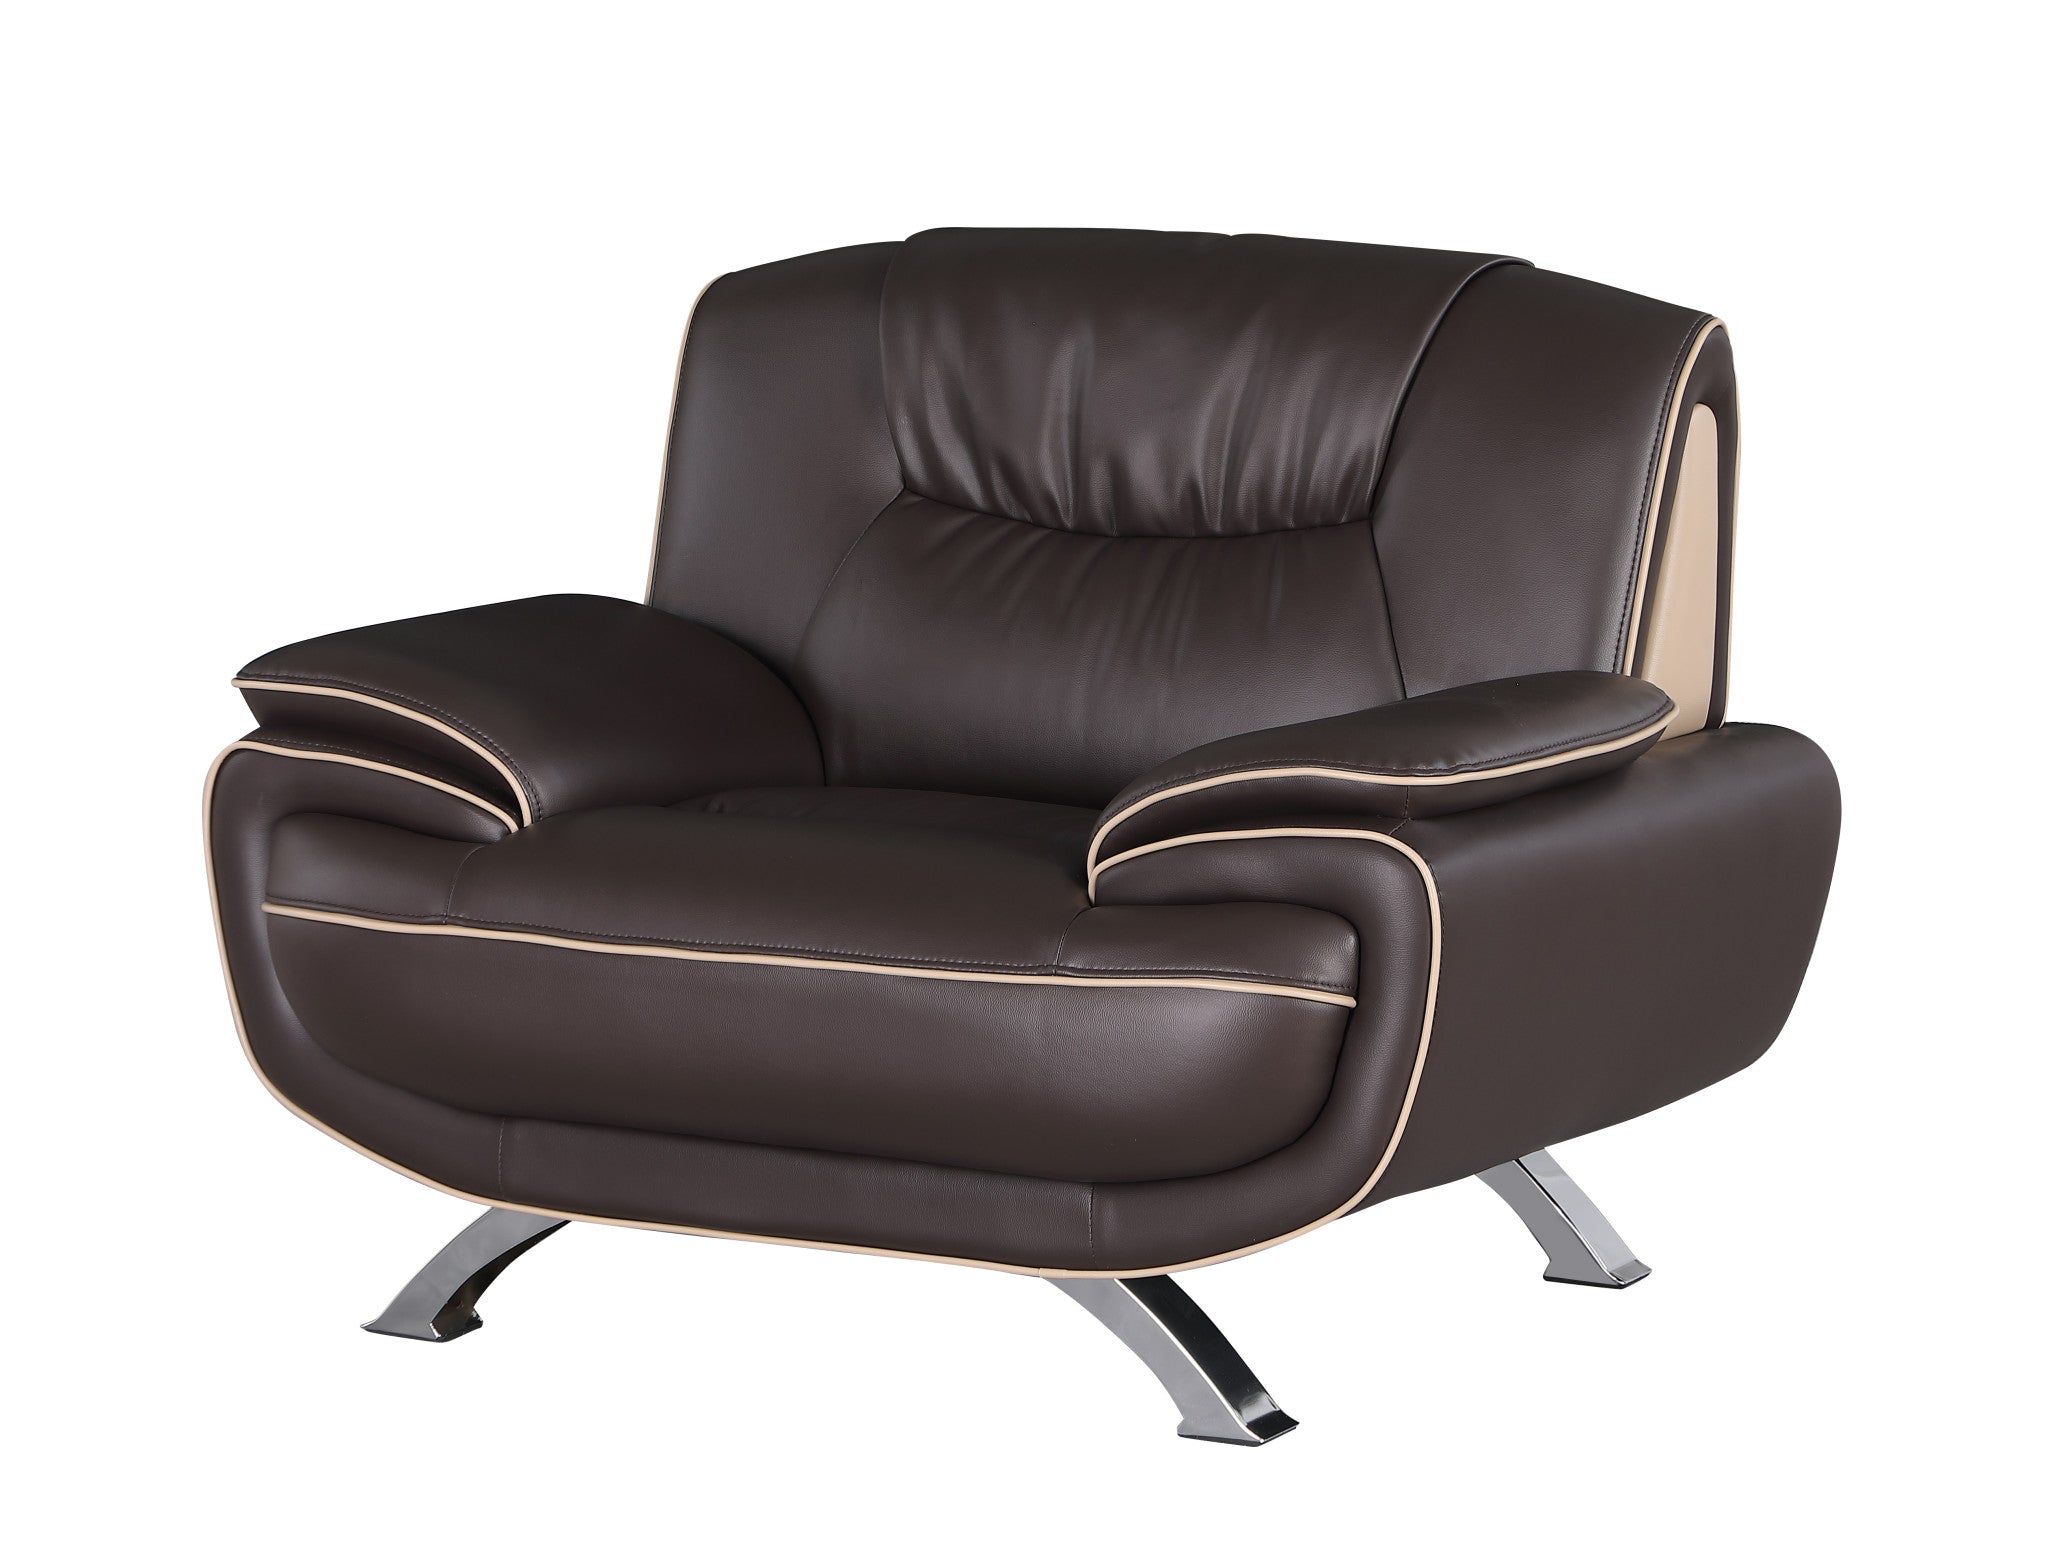 47" Brown and Silver Leather Match Arm Chair